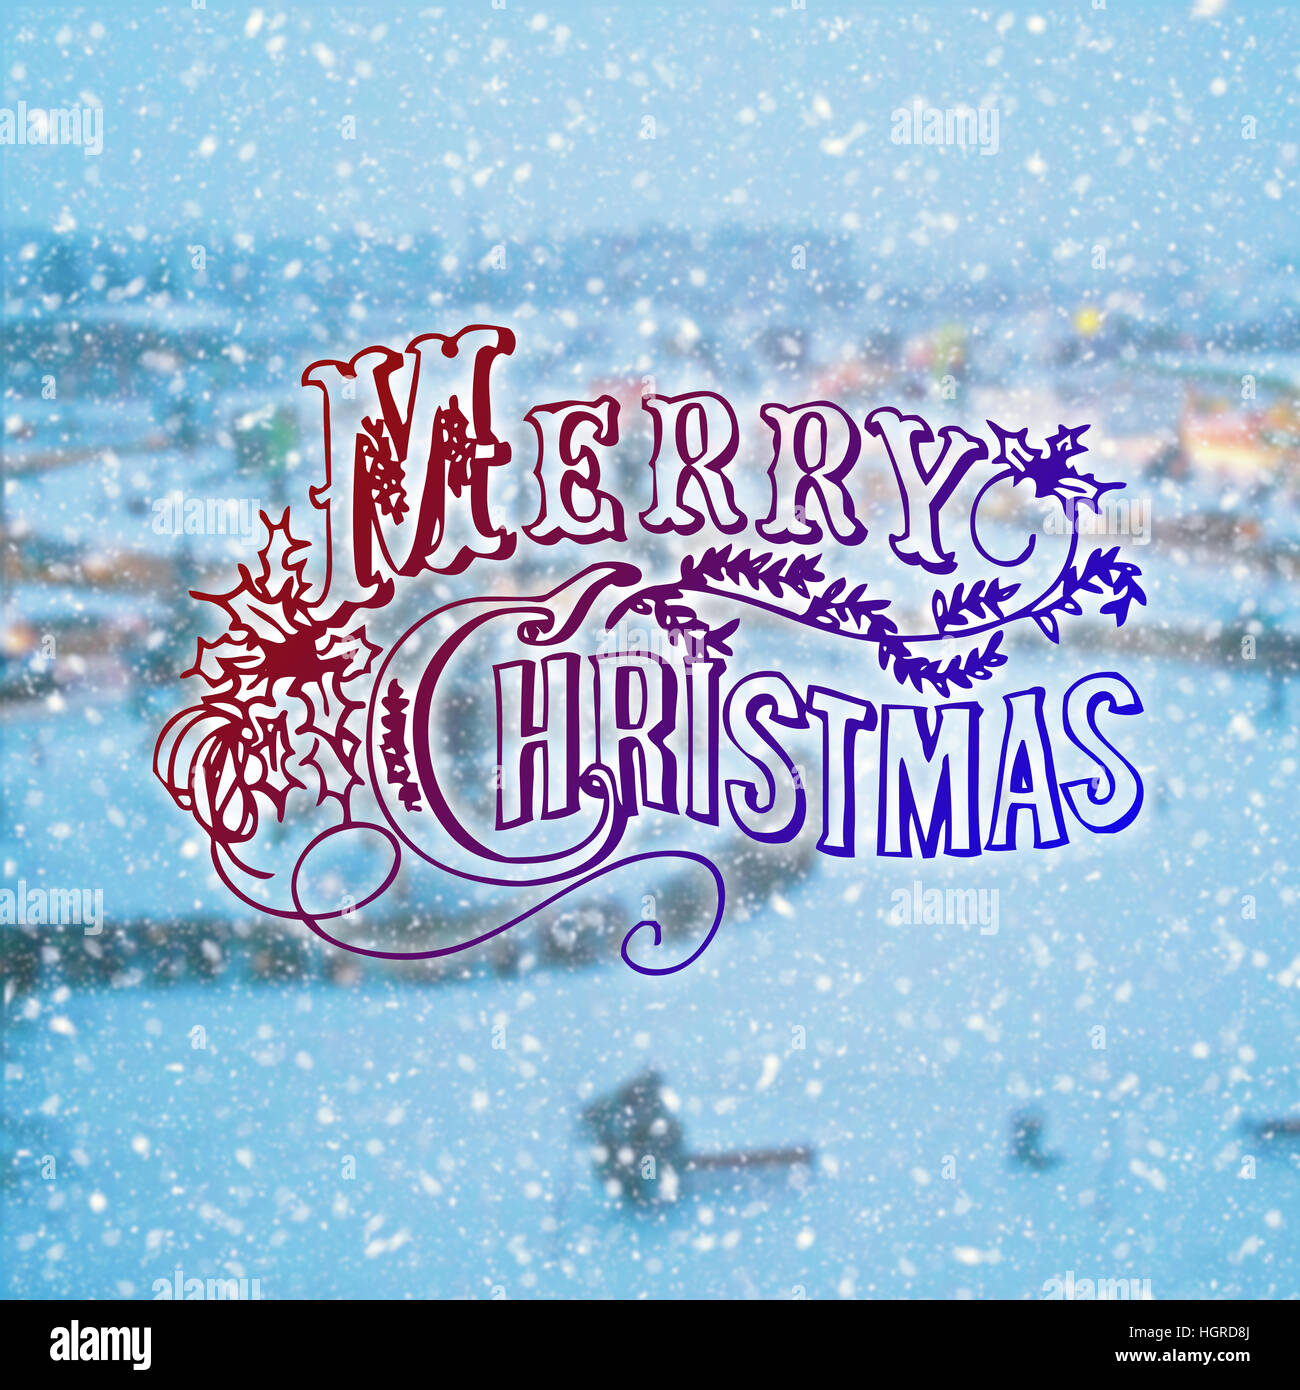 Merry christmas and winter inspirational quote with beautiful ...